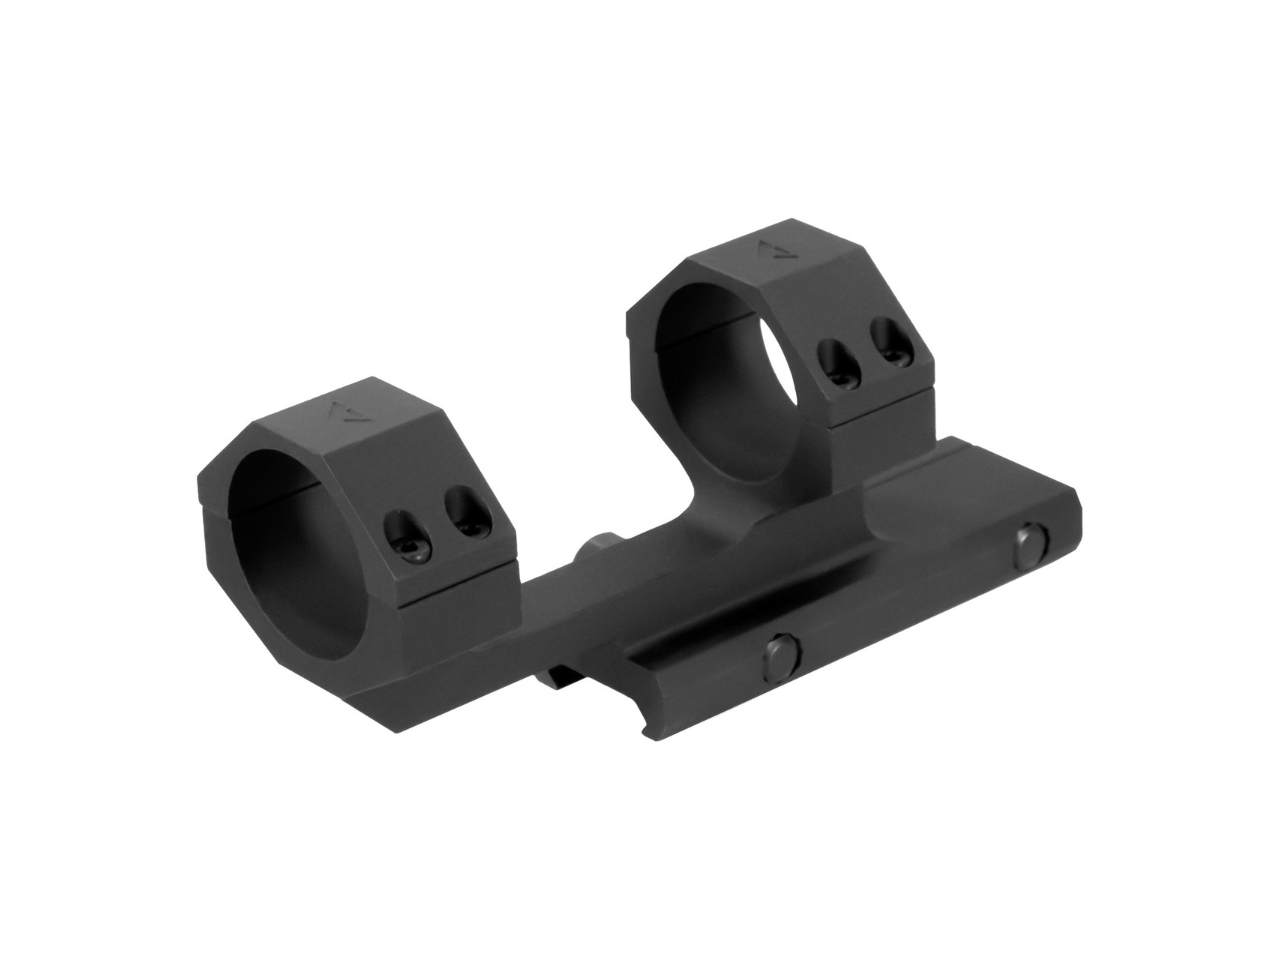 AIM 30mm Cantilever Scope Mount 1.5" Height